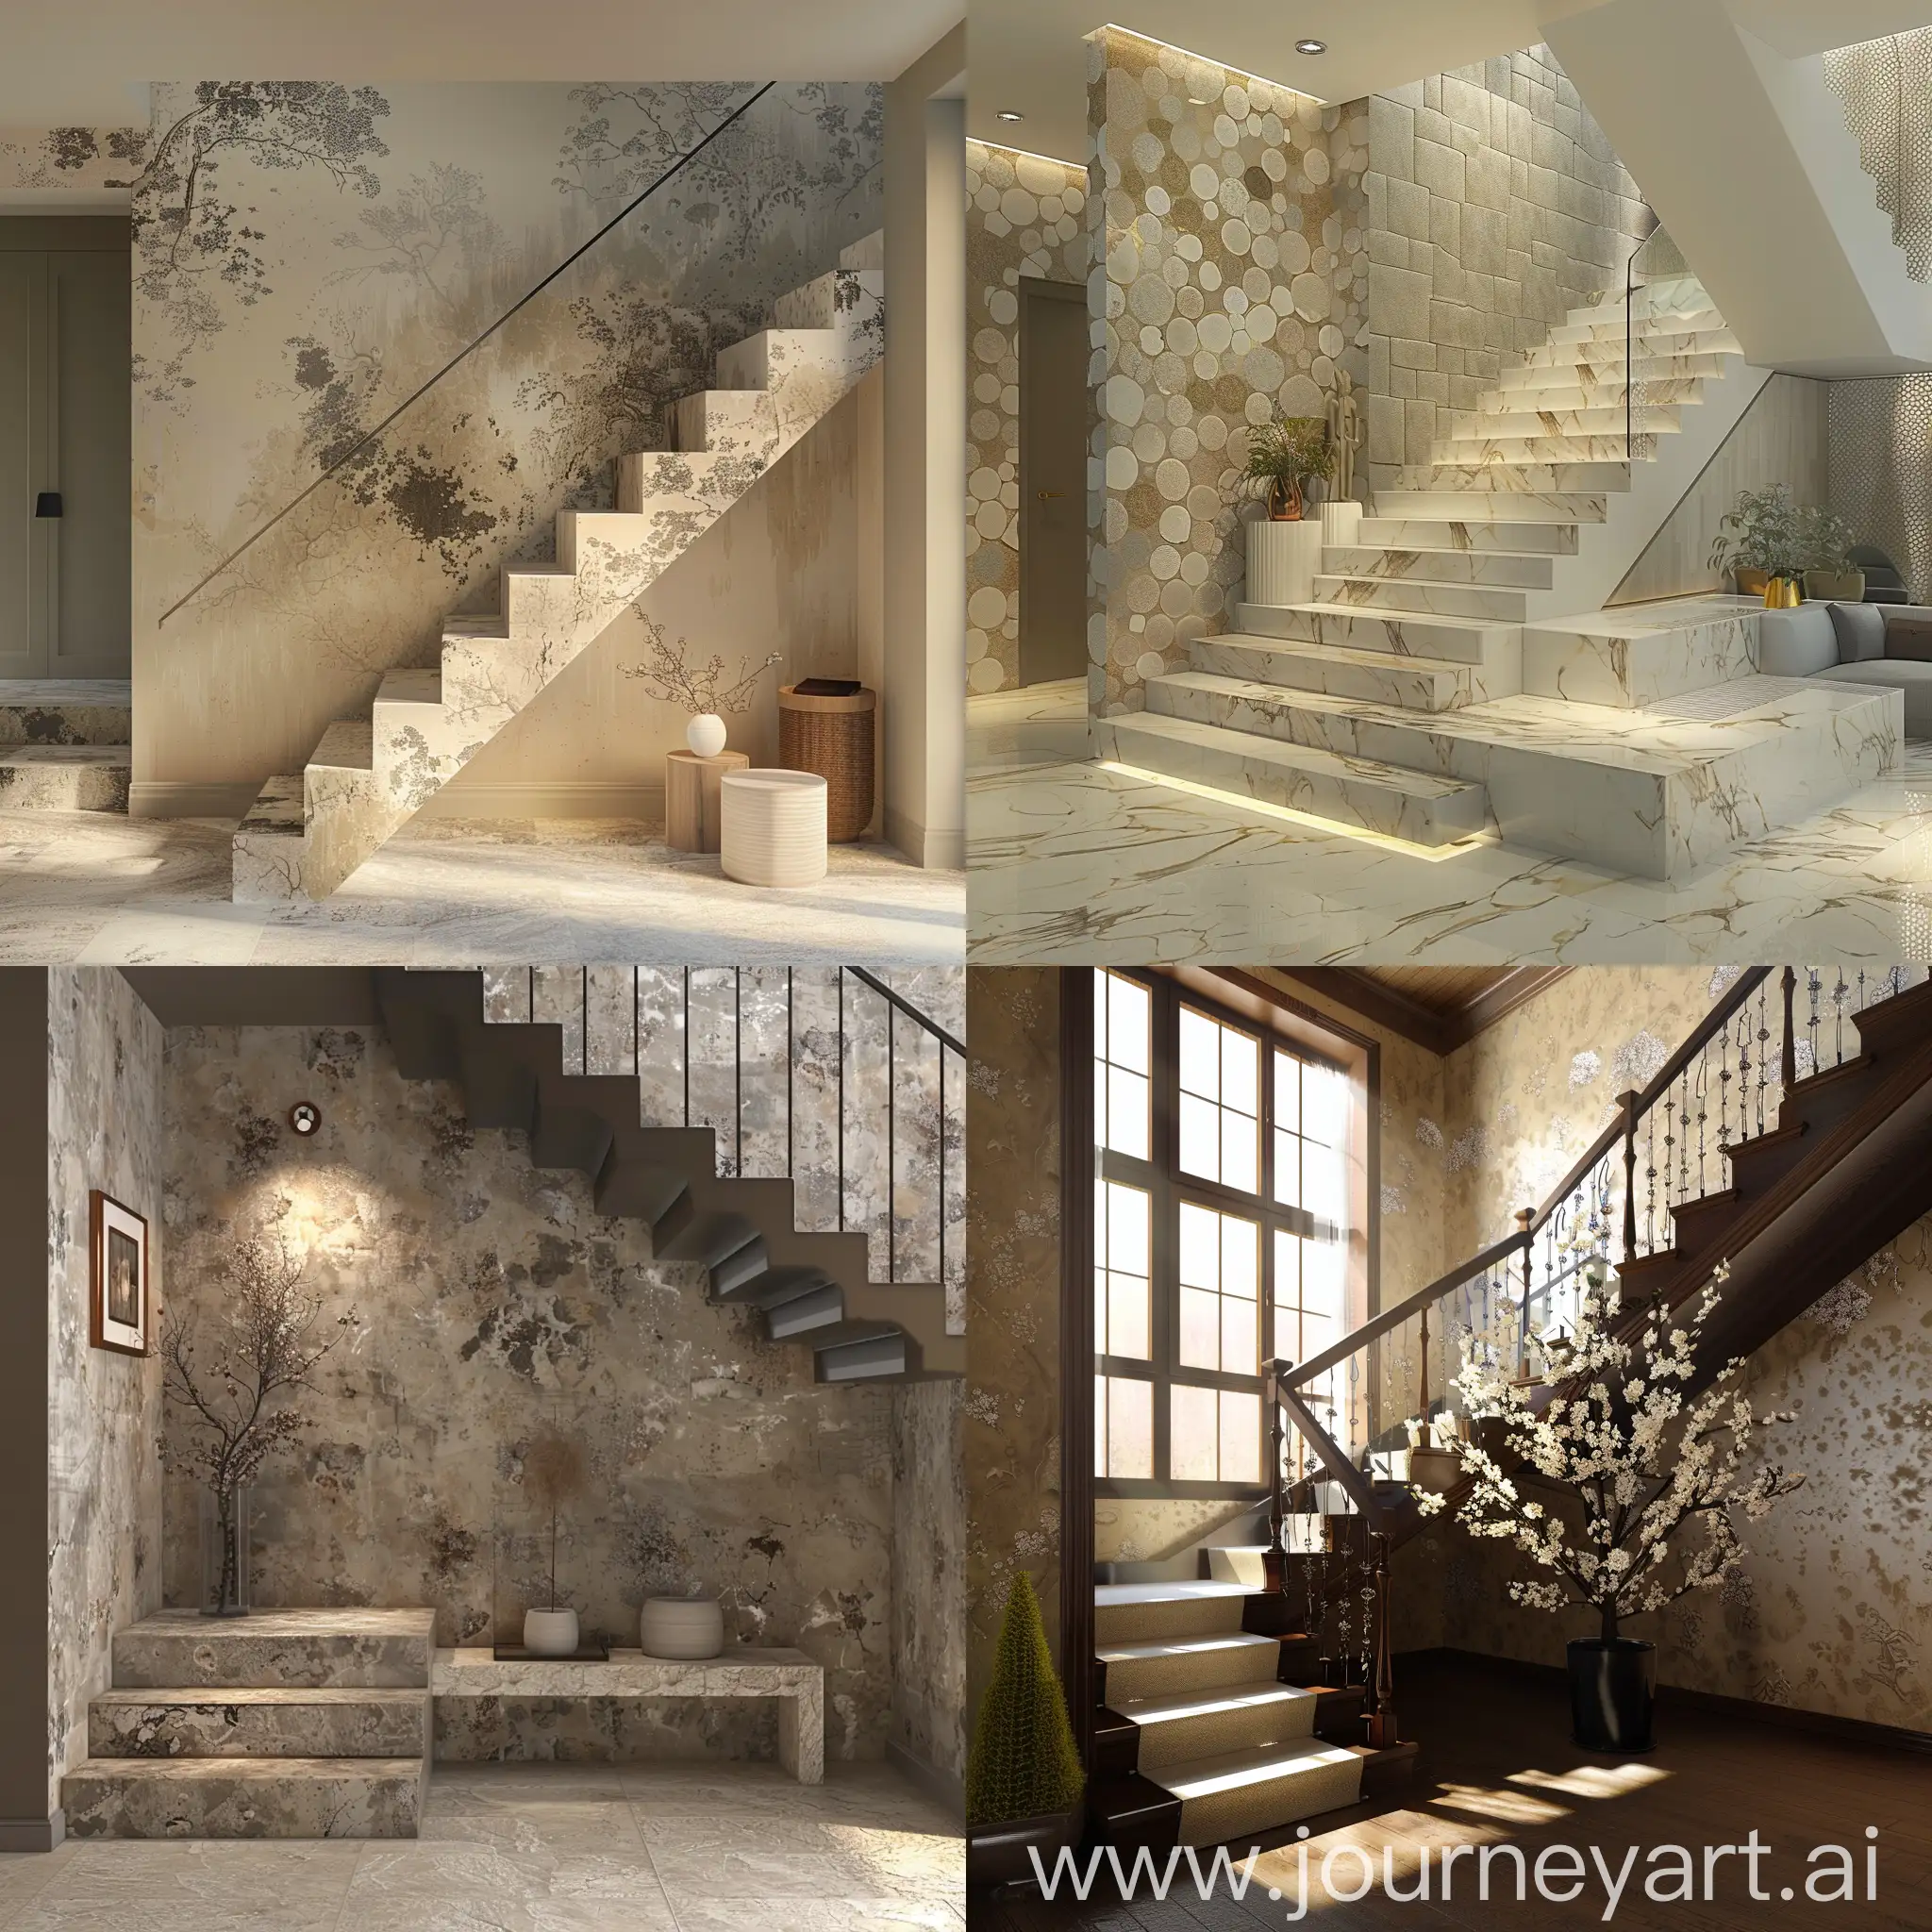 Midlanding-Staircase-with-Elegant-Wallpapers-and-Textured-Finish-for-Luxurious-Home-Interior